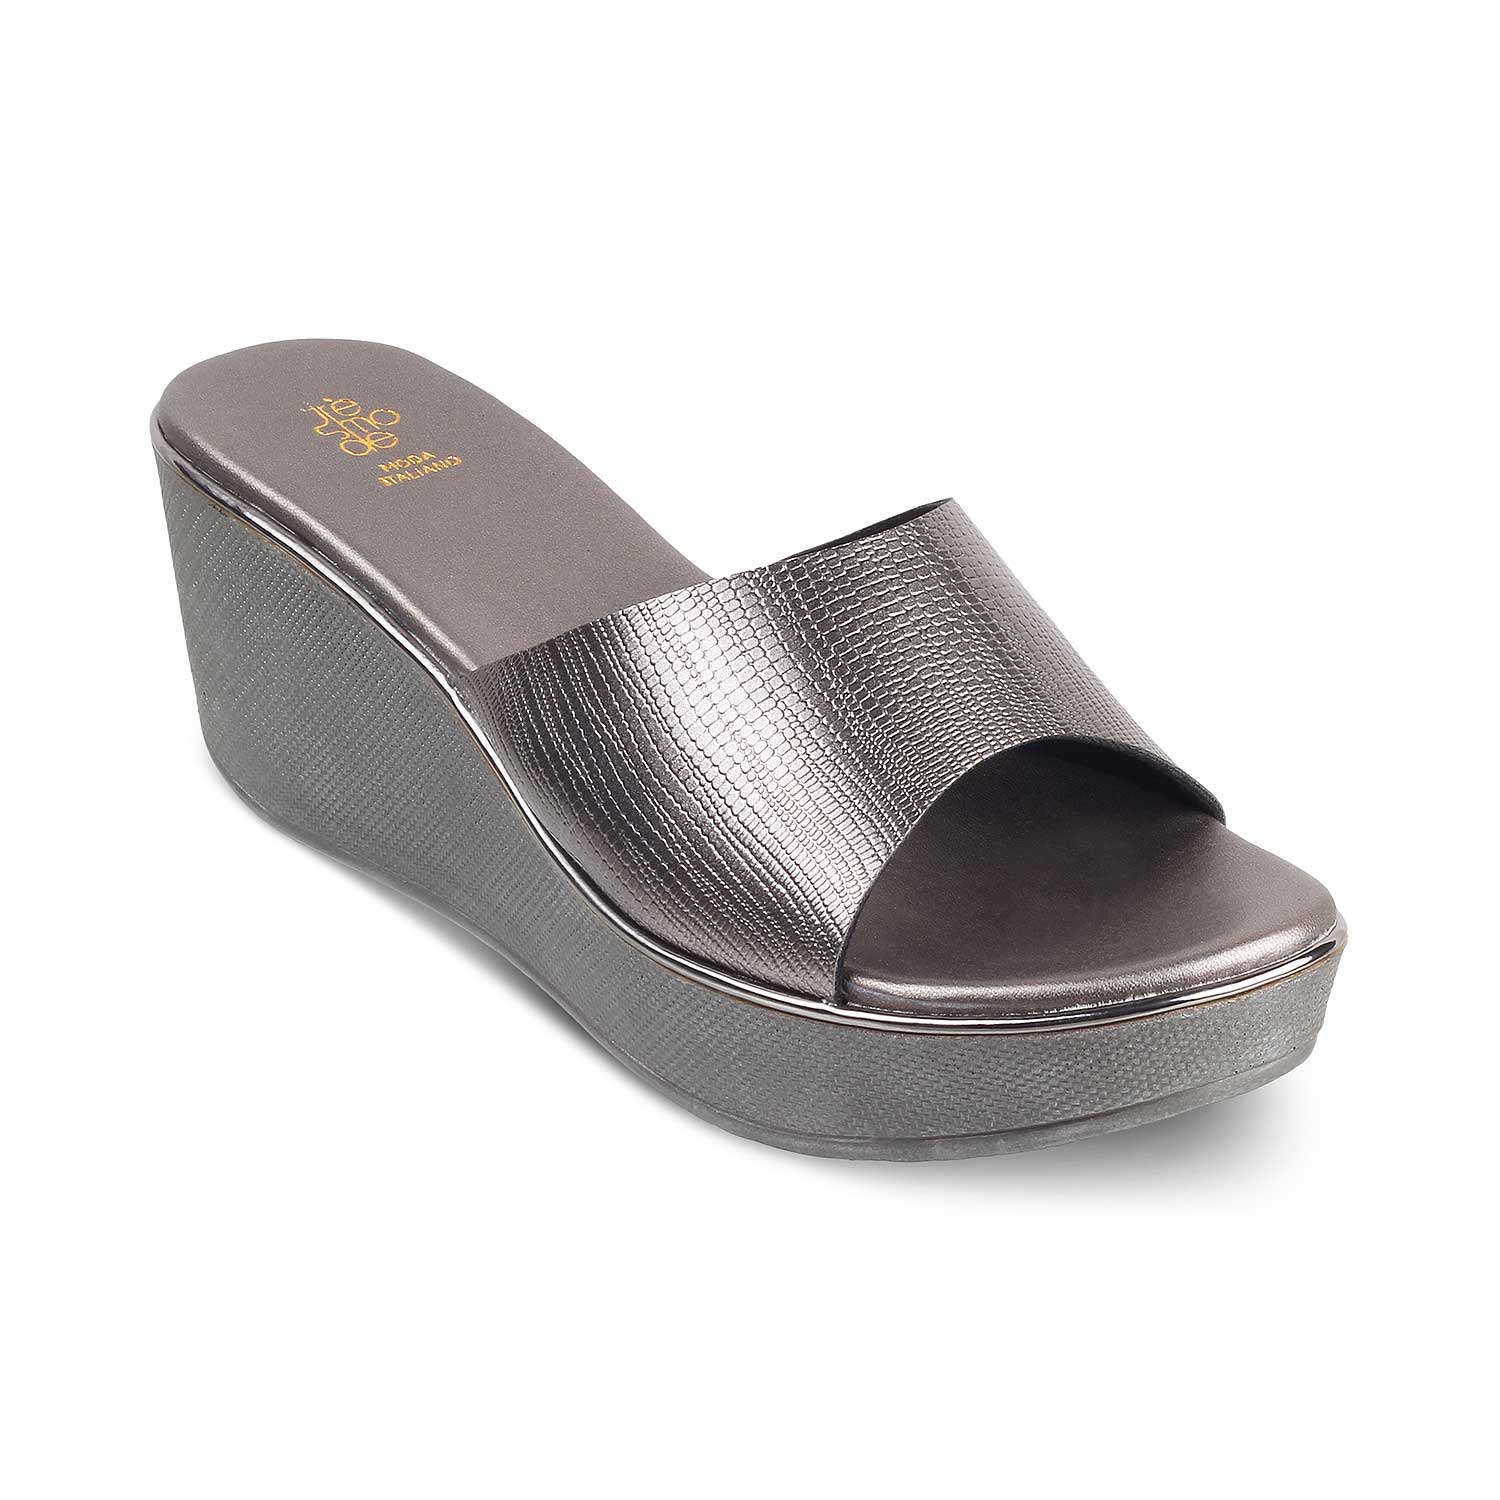 The Sanle Pewter Women's Dress Wedge Sandals Tresmode - Tresmode